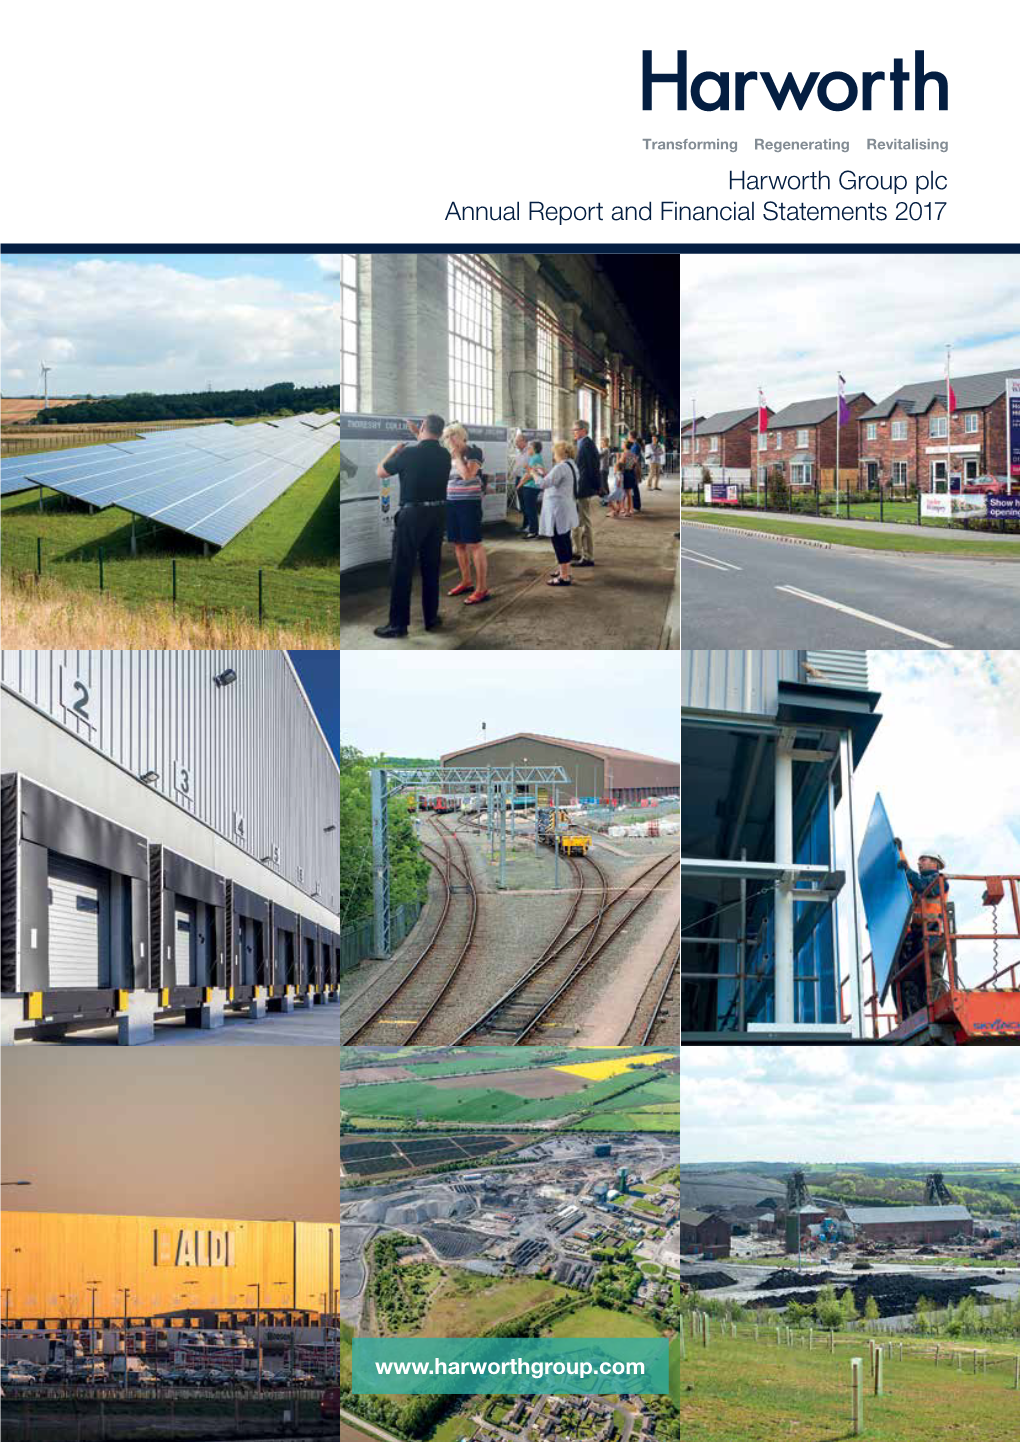 Harworth Group Plc Annual Report and Financial Statements 2017